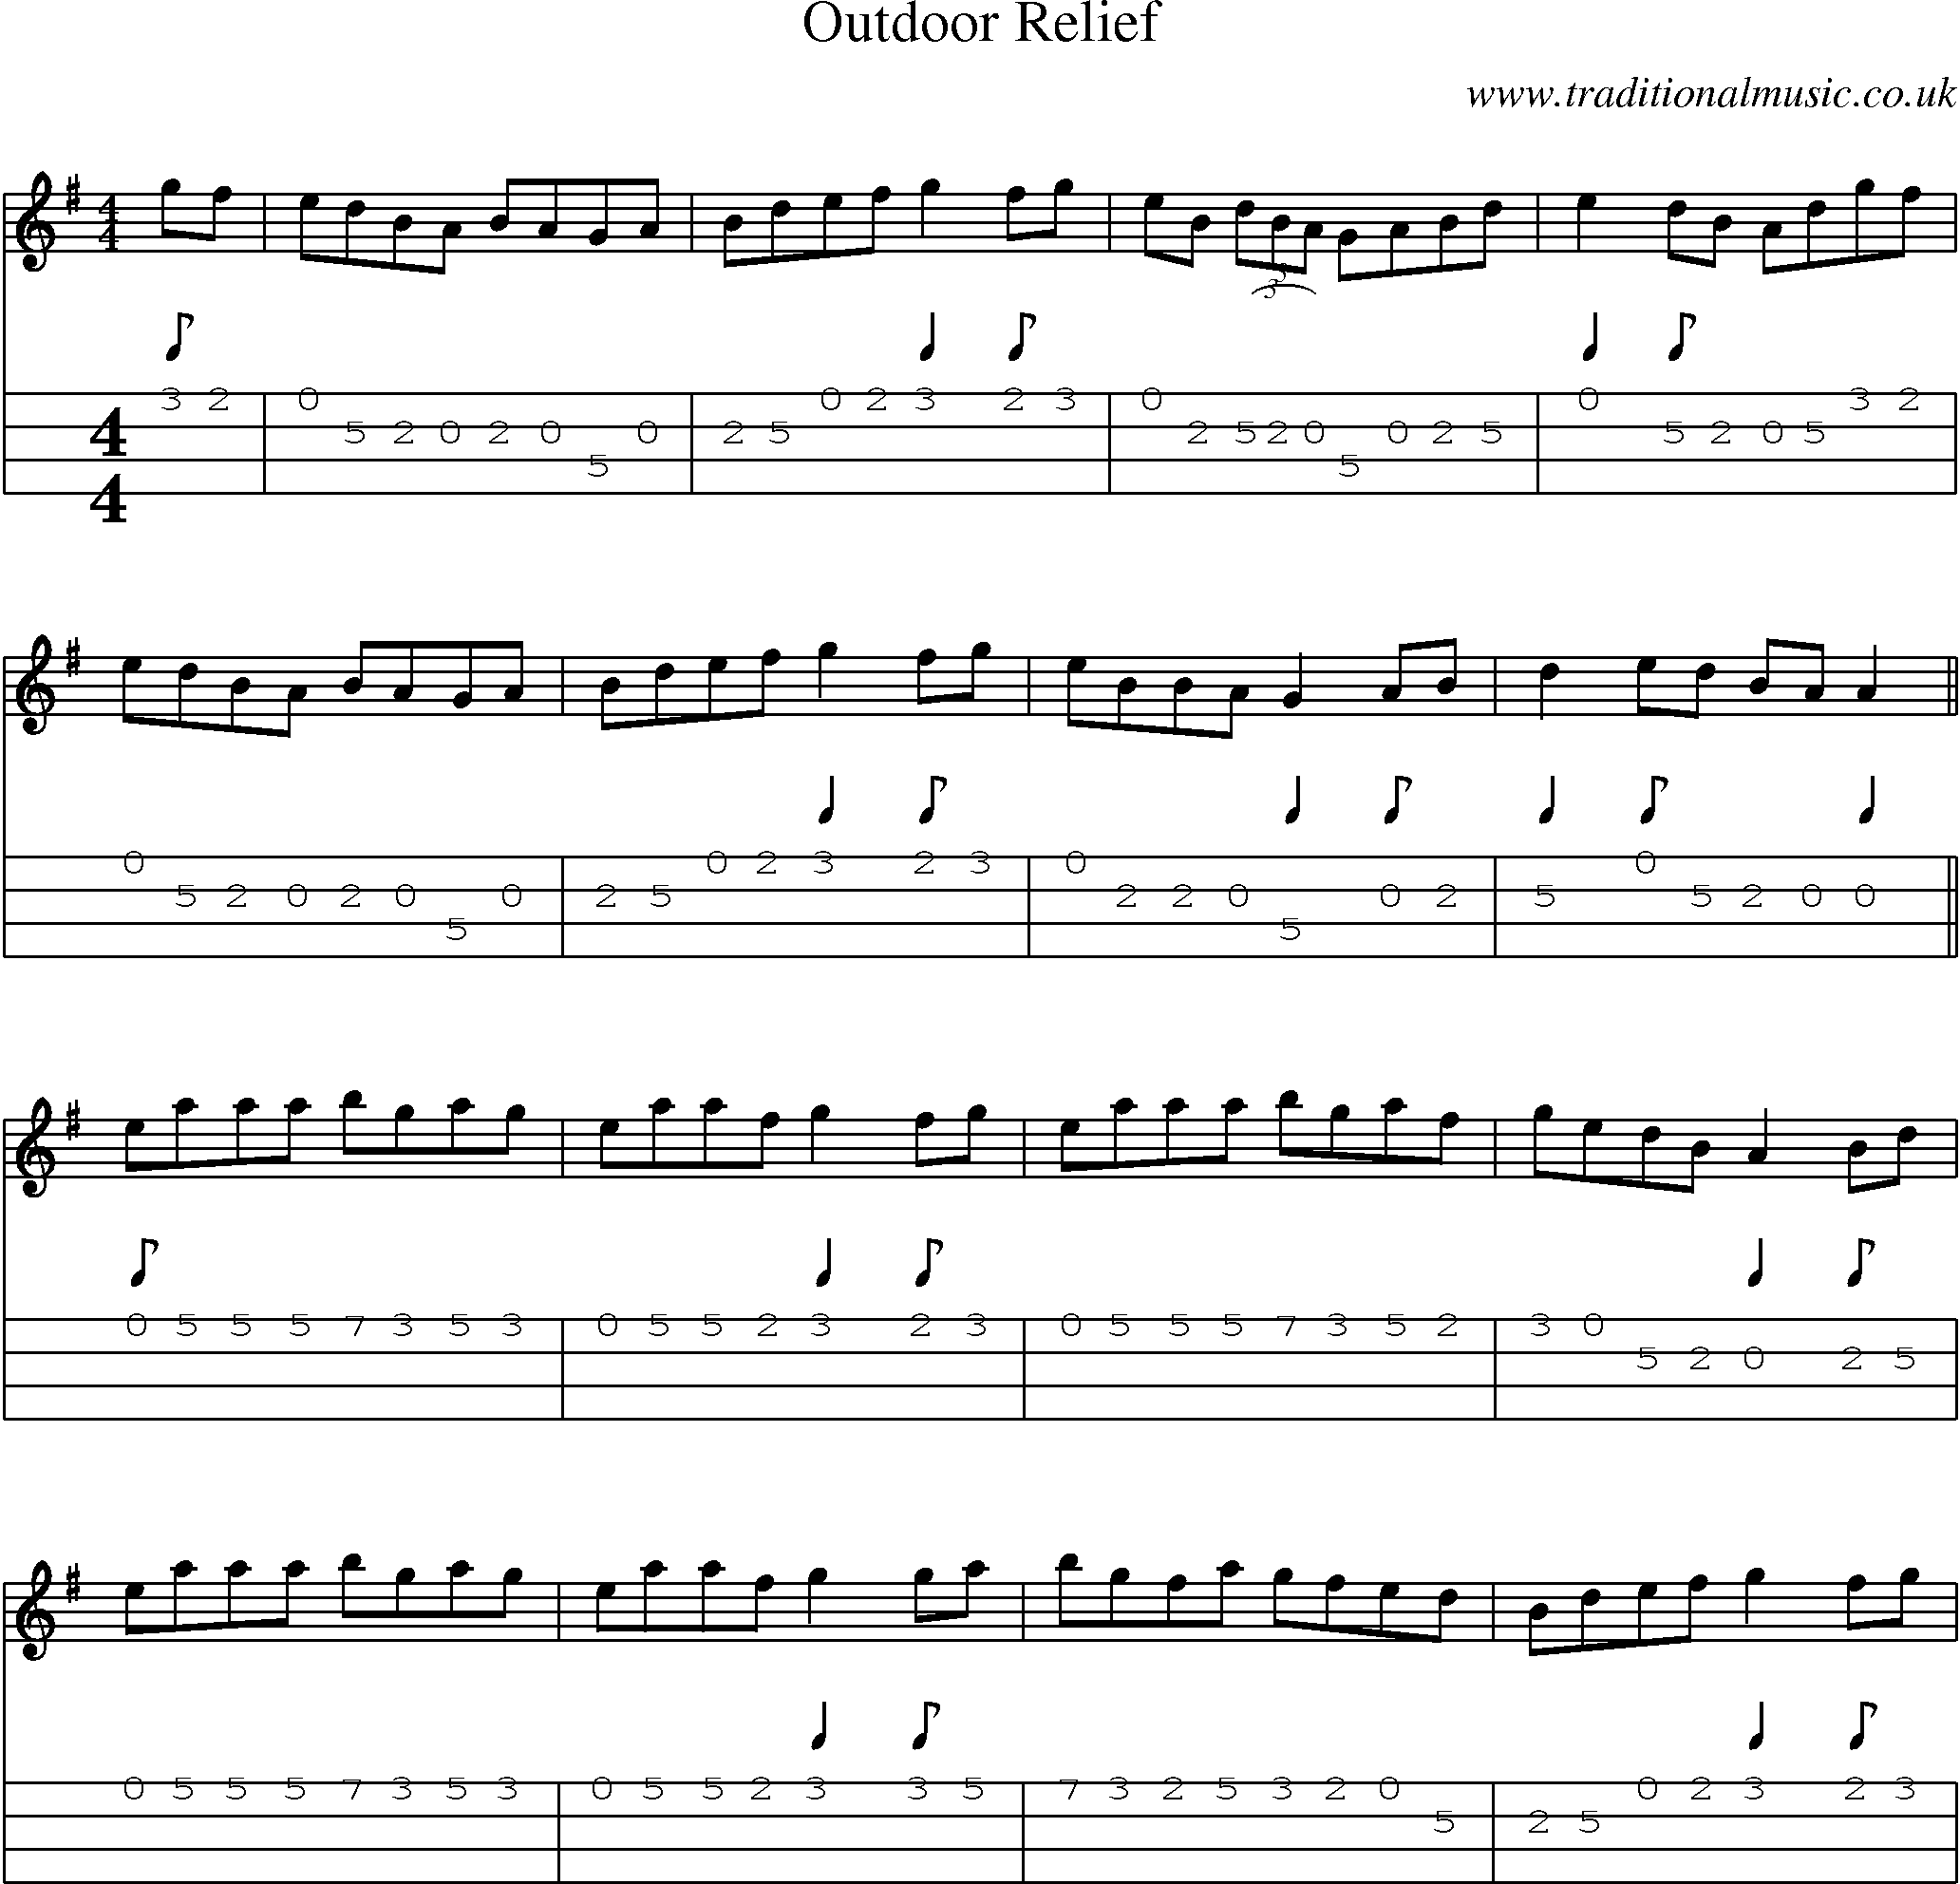 Music Score and Mandolin Tabs for Outdoor Relief